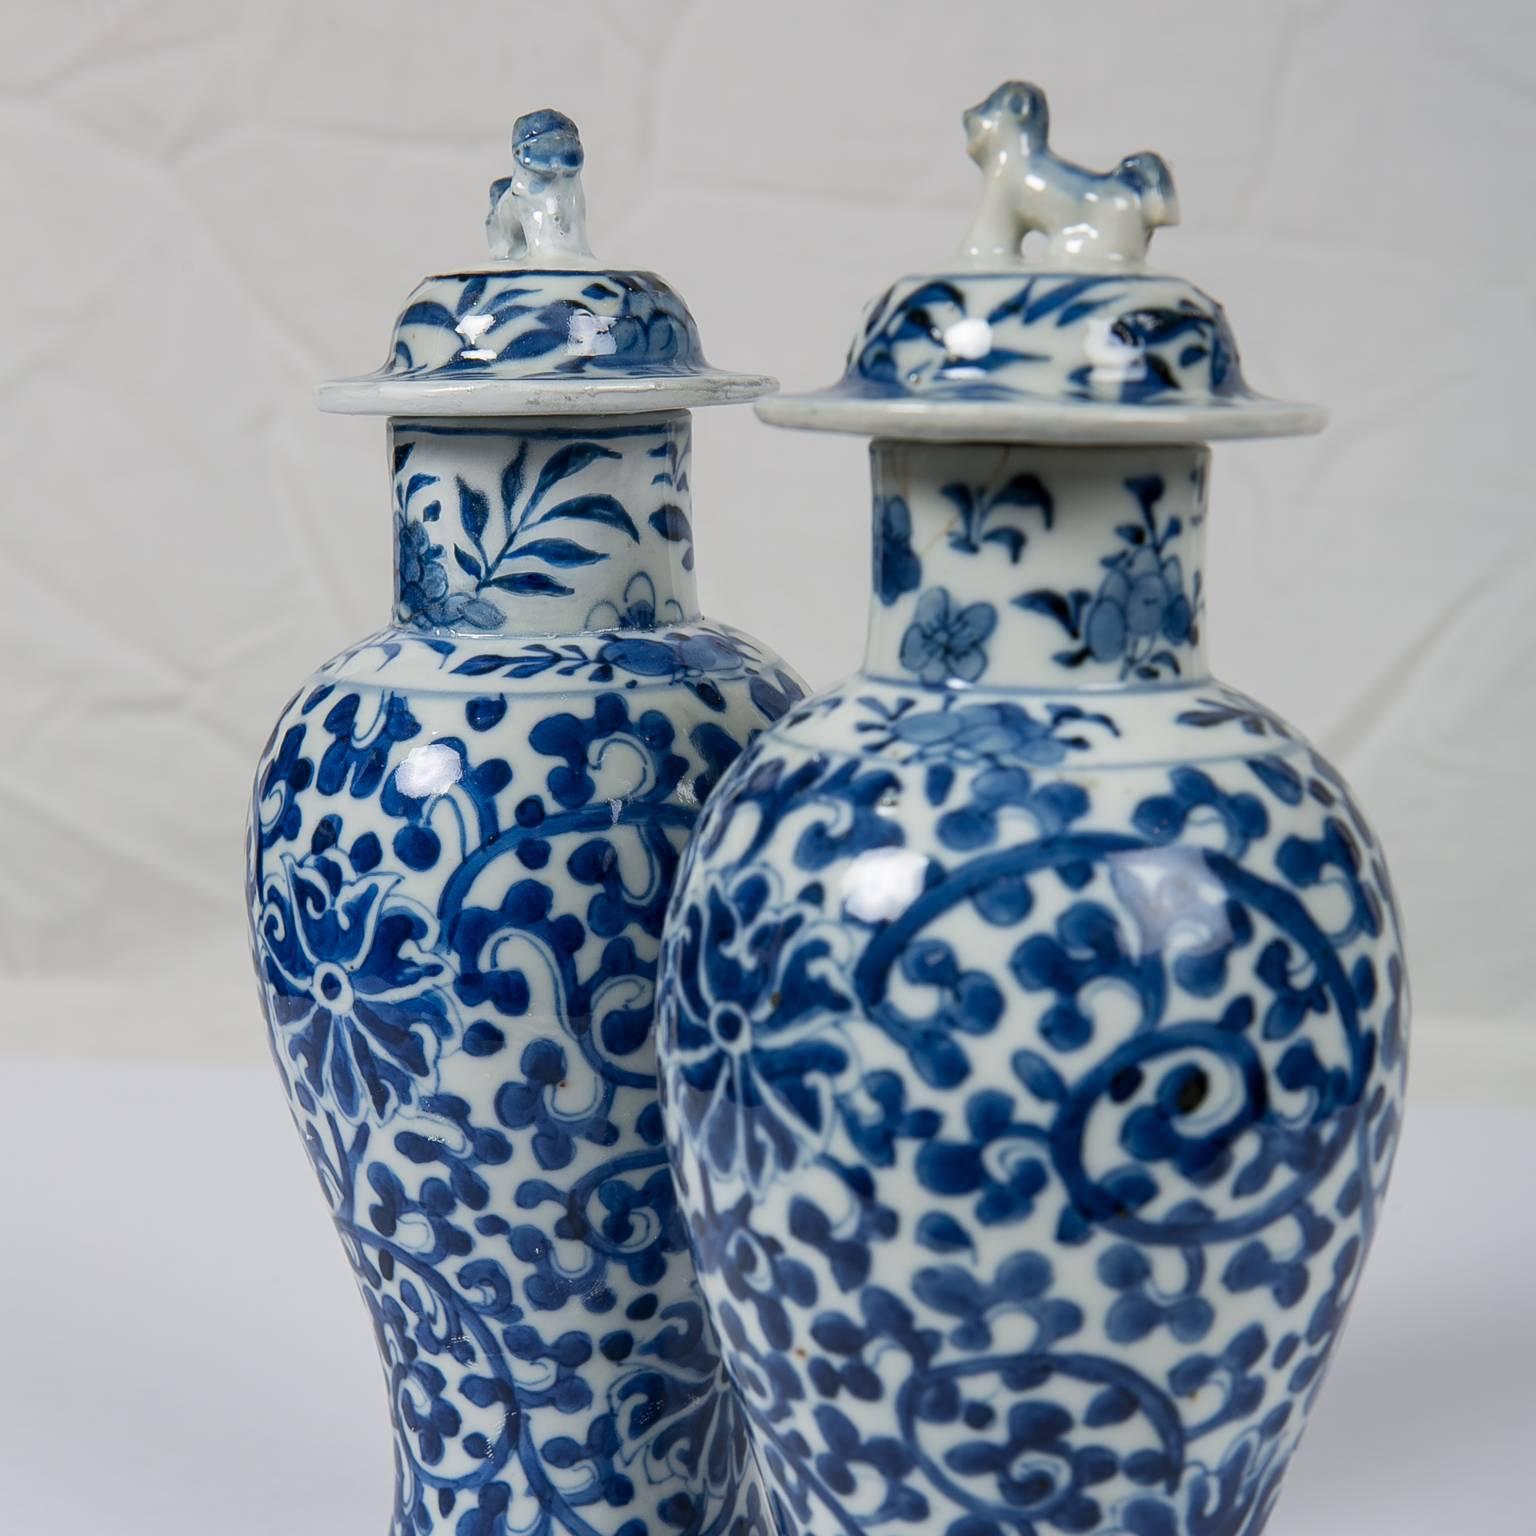 A pair of blue and white Qing dynasty Chinese covered vases painted in deep cobalt blue with a design of Tibetan flowers and scrolling vines. The decoration is harmonious with the shape of the well proportioned vases. The vases are small measuring 9